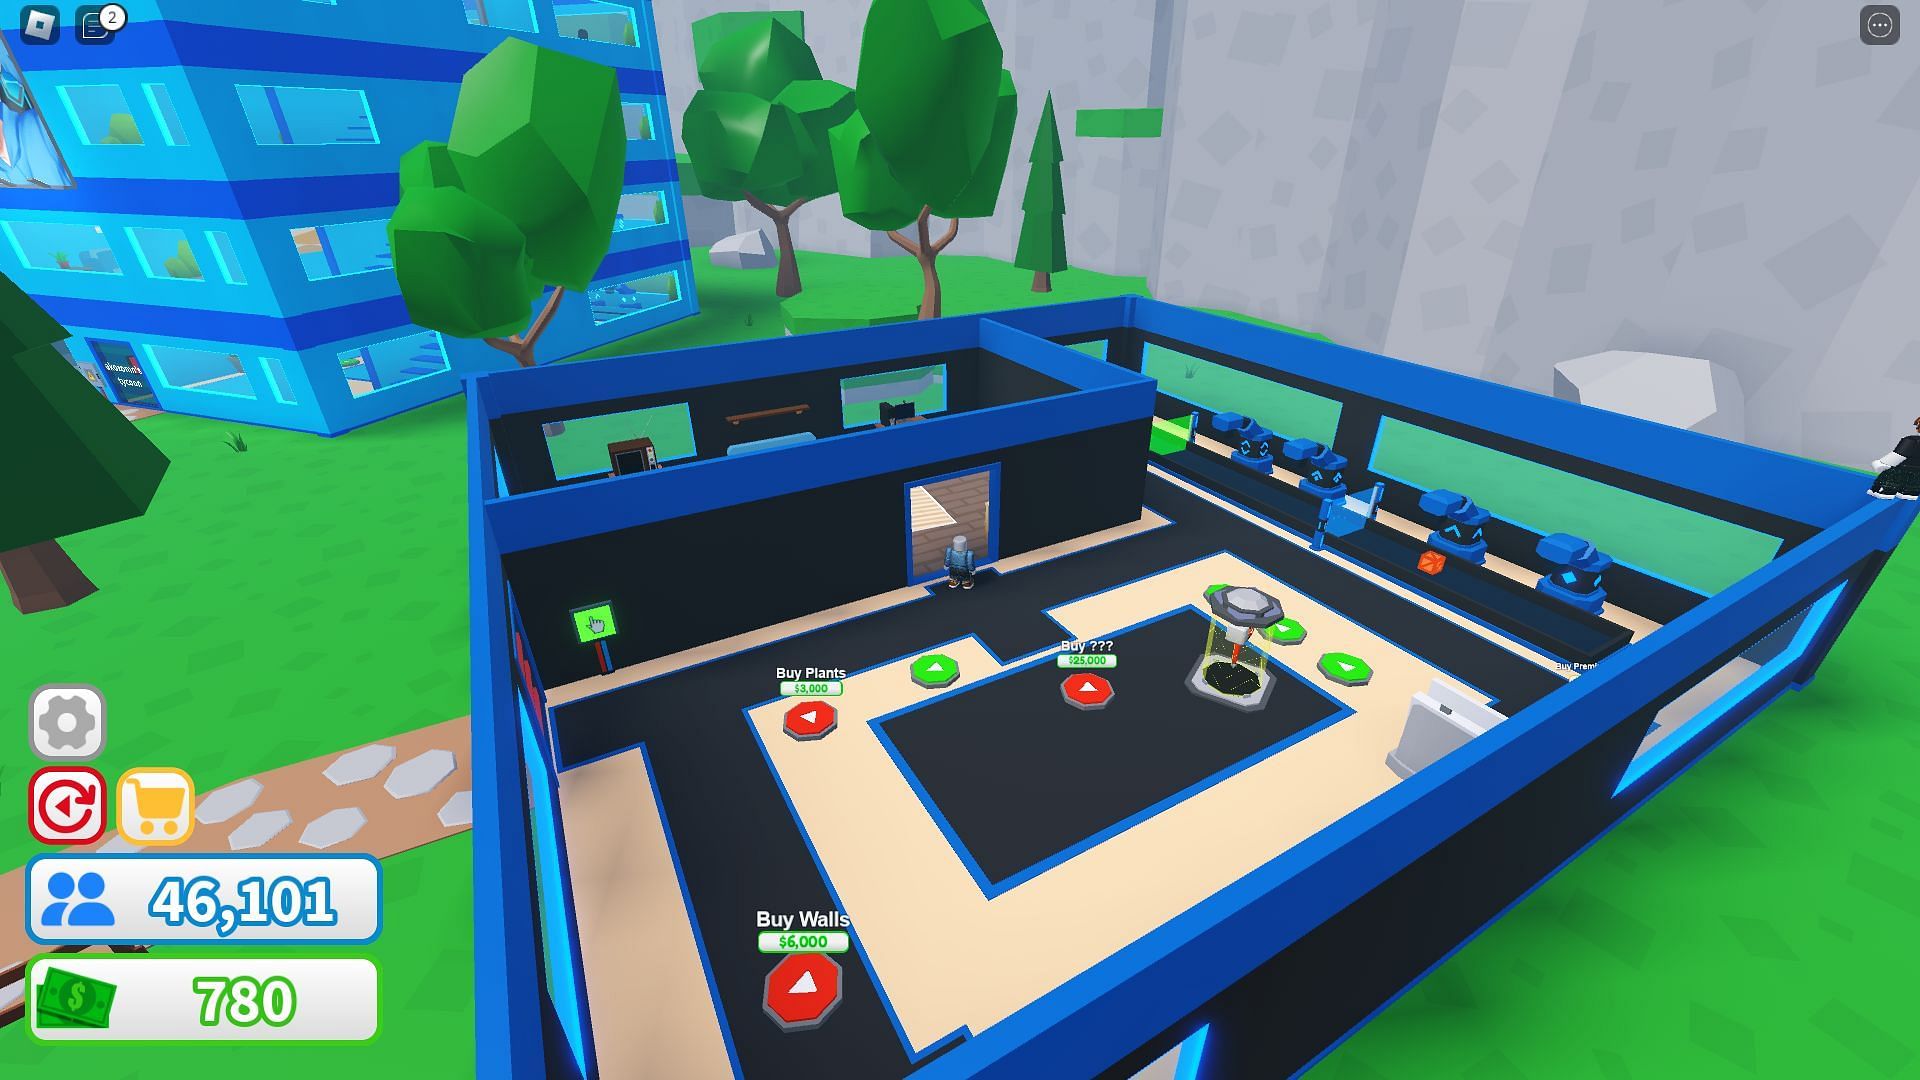 Partially-upgraded first floor in YouTuber Tycoon (Image via Roblox)